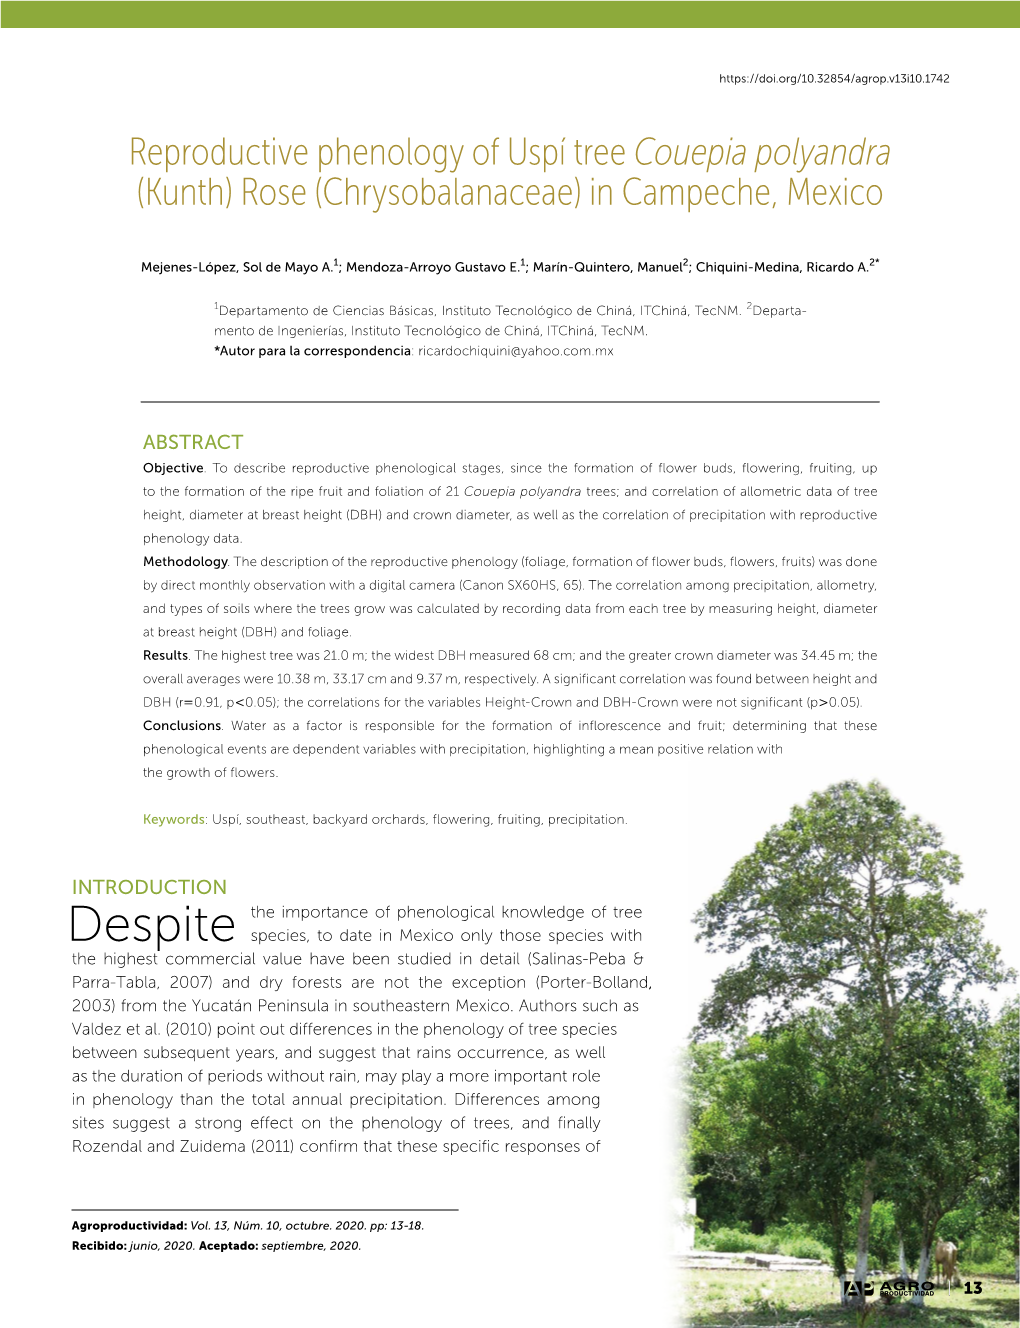 Reproductive Phenology of Uspí Tree Couepia Polyandra (Kunth) Rose (Chrysobalanaceae) in Campeche, Mexico